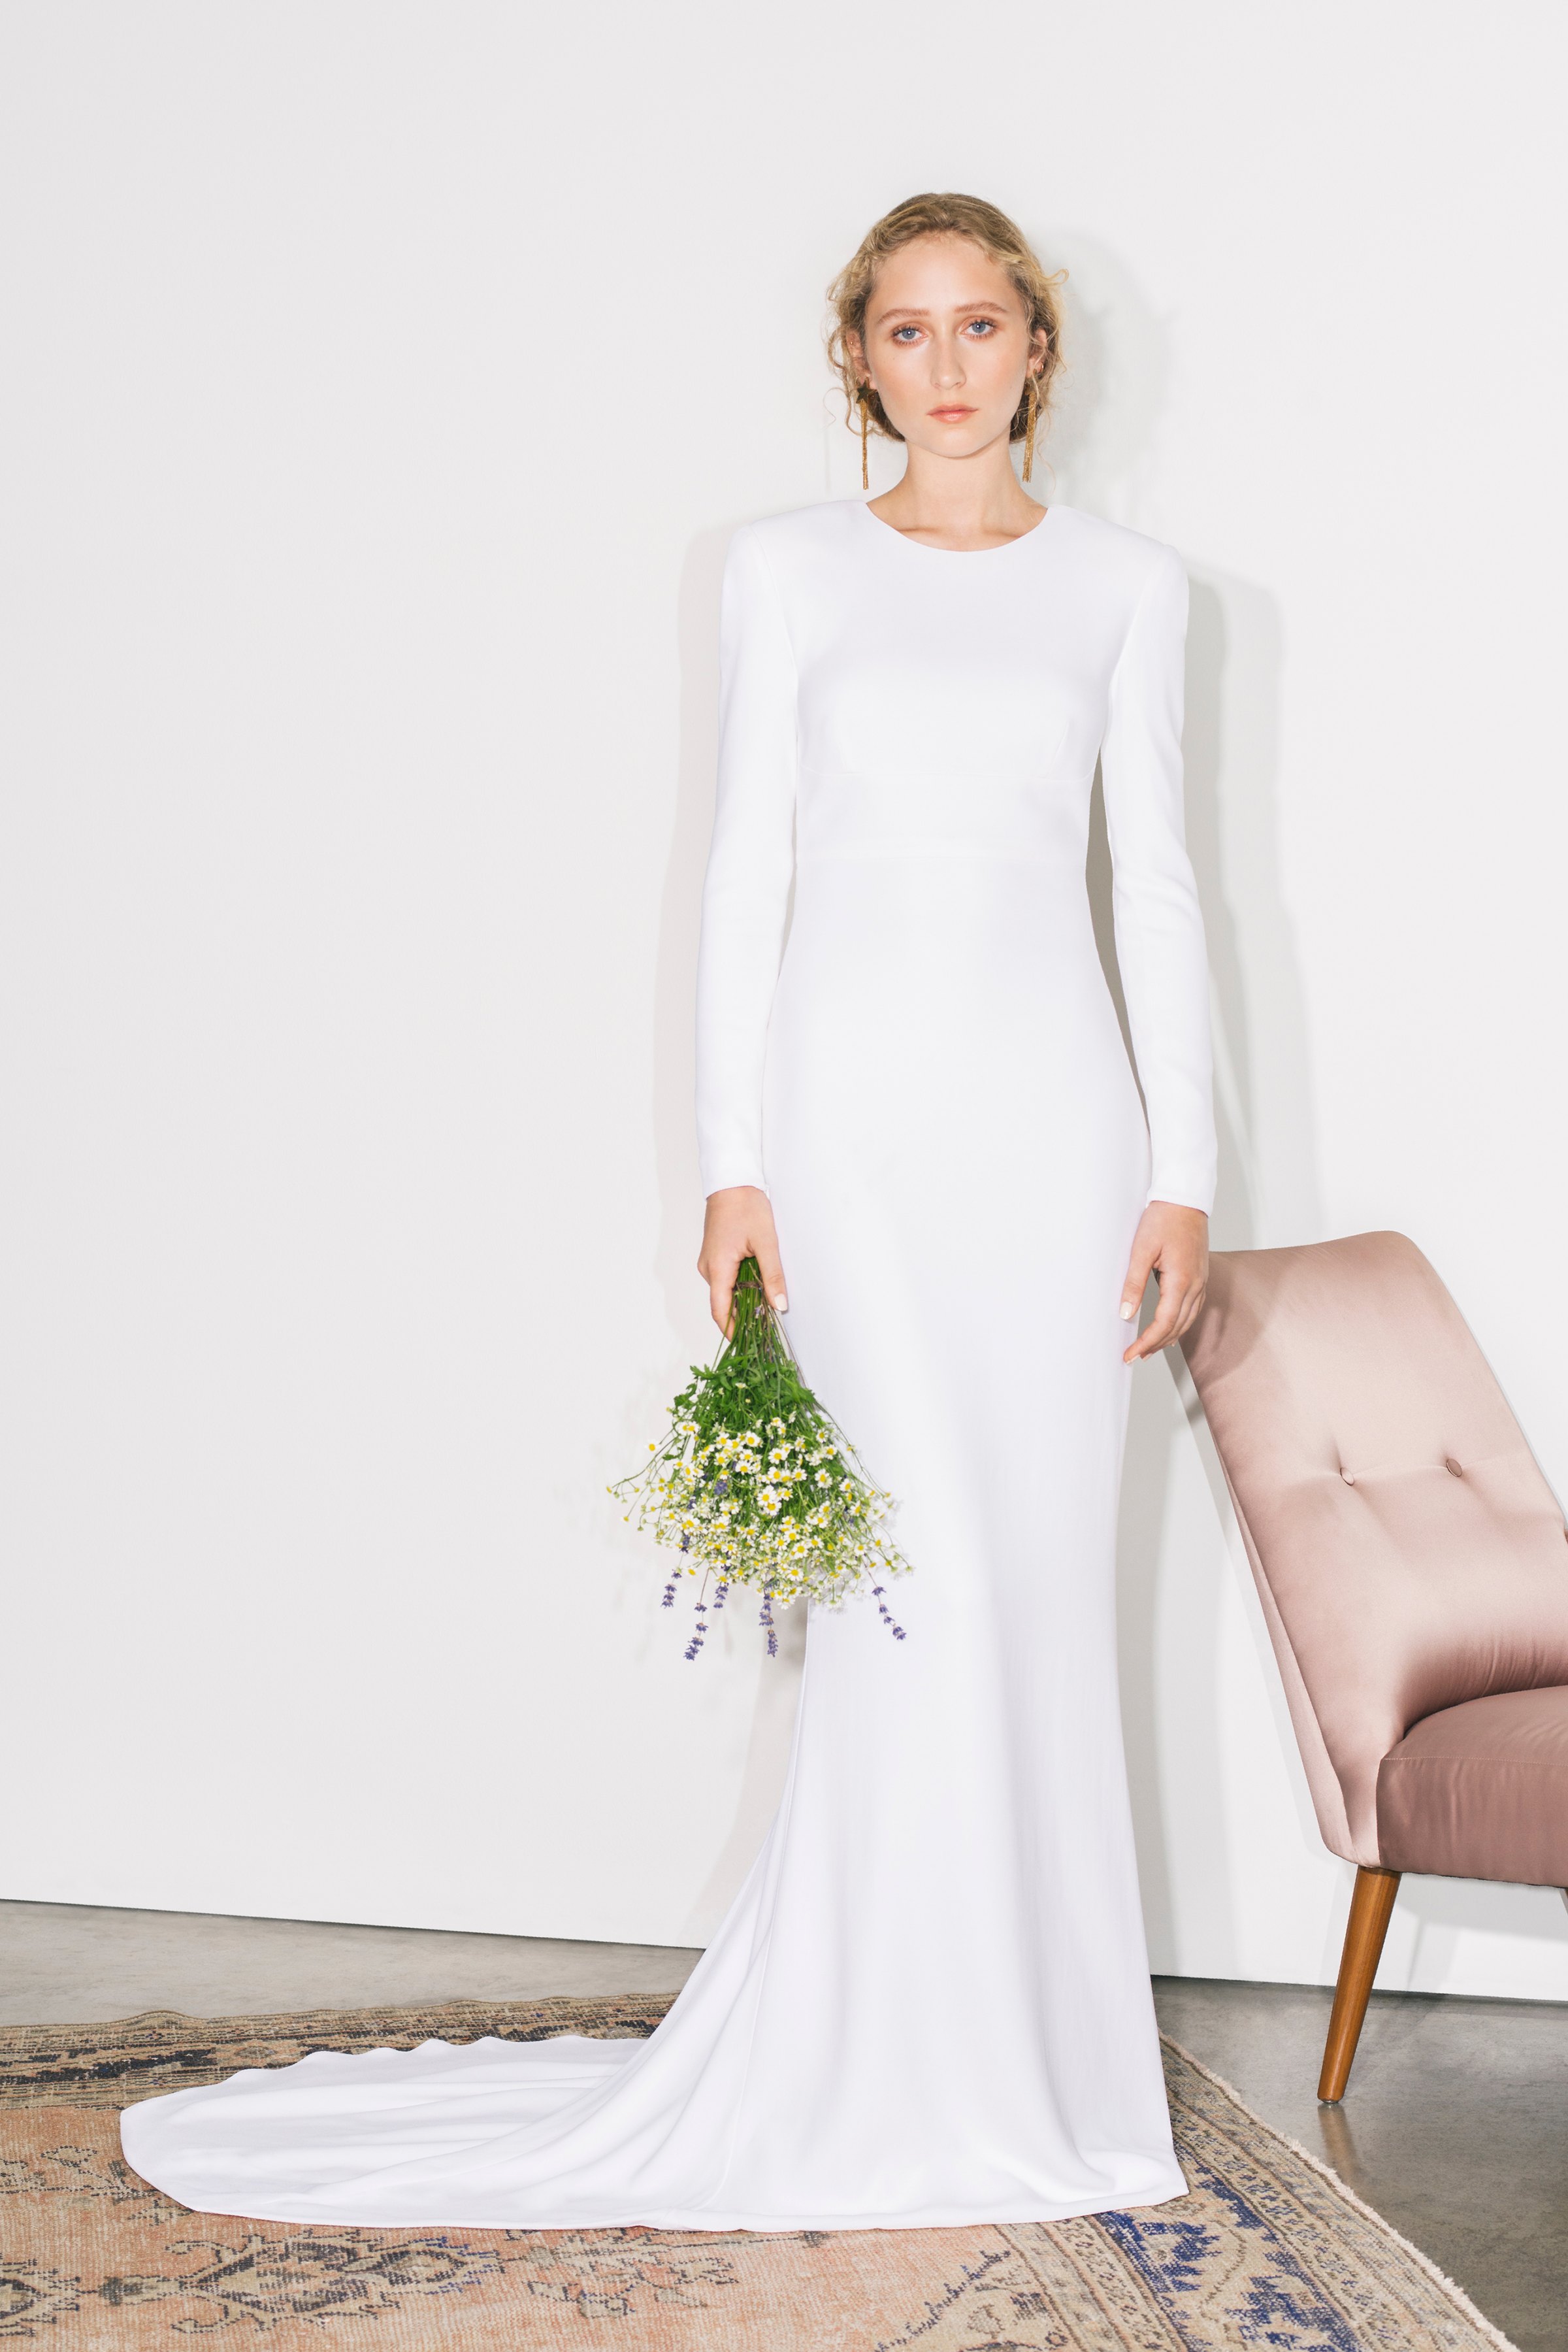 Stella McCartney Launches Royal Wedding Bridal Collection: Details